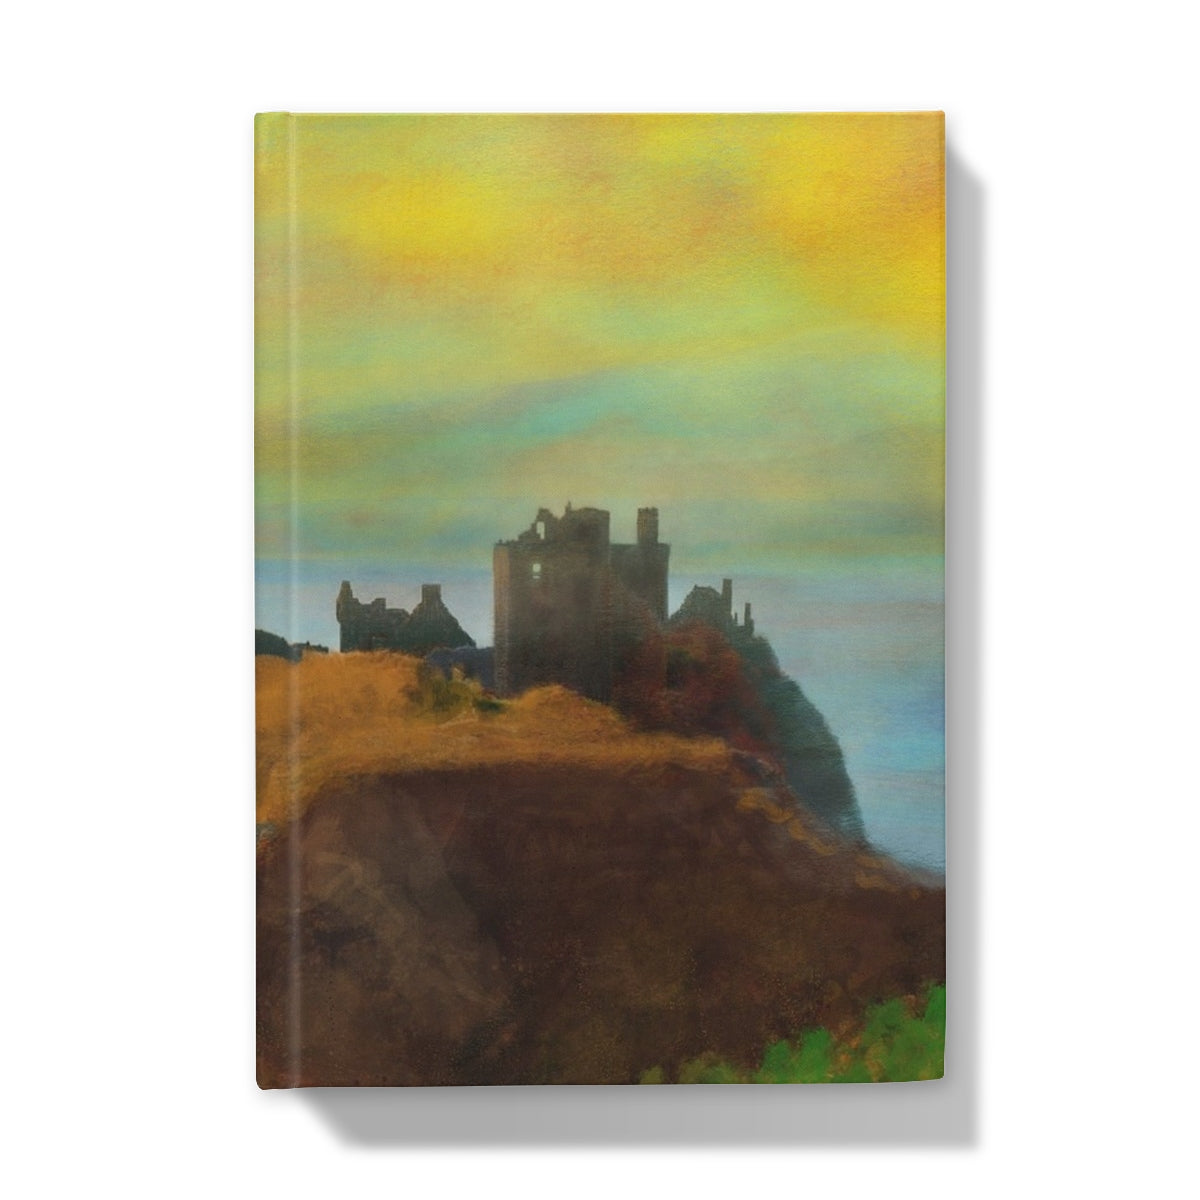 Dunnottar Castle Art Gifts Hardback Journal-Journals & Notebooks-Historic & Iconic Scotland Art Gallery-A5-Plain-Paintings, Prints, Homeware, Art Gifts From Scotland By Scottish Artist Kevin Hunter